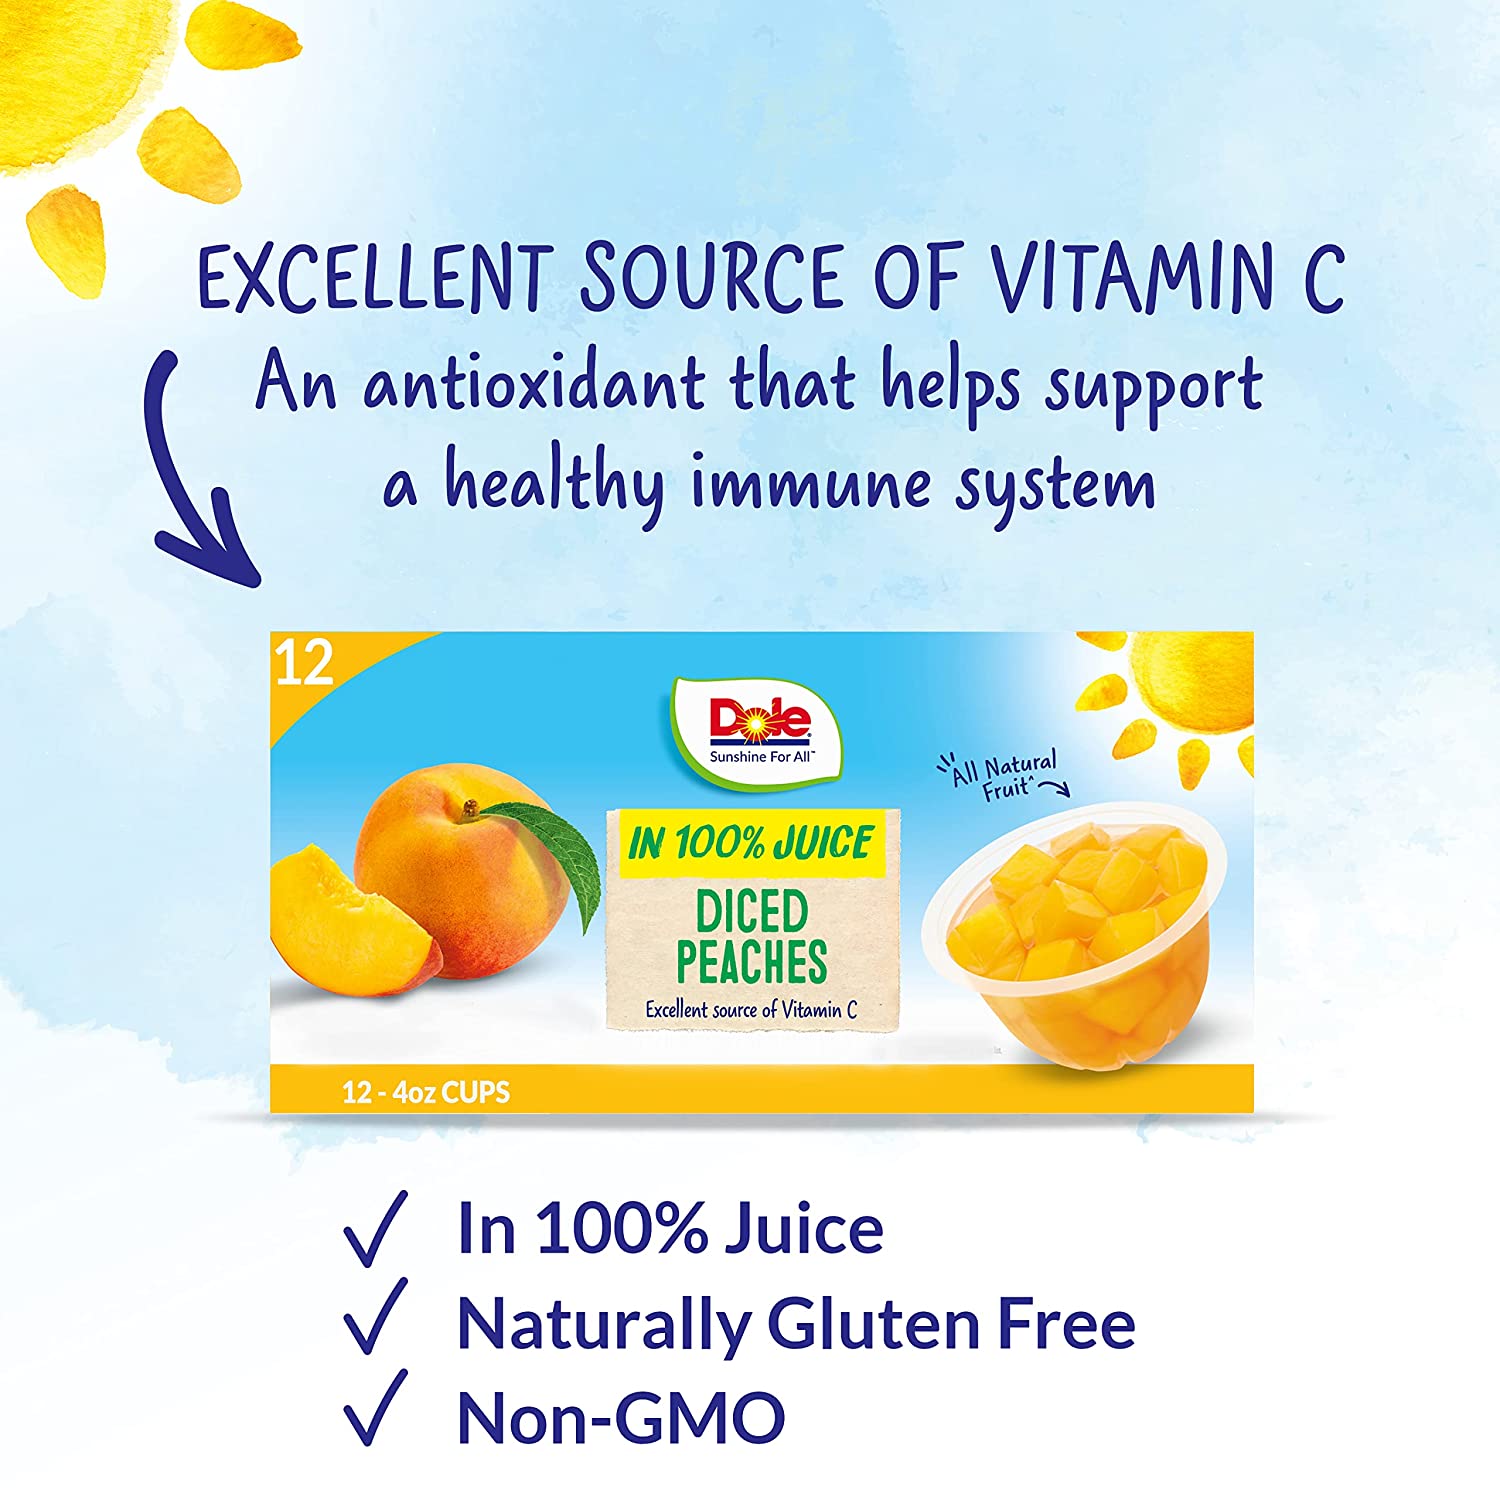 Dole Fruit Bowls Diced Peaches in 100% Juice, Gluten Free Healthy Snack, 4 Oz, 12 Cups